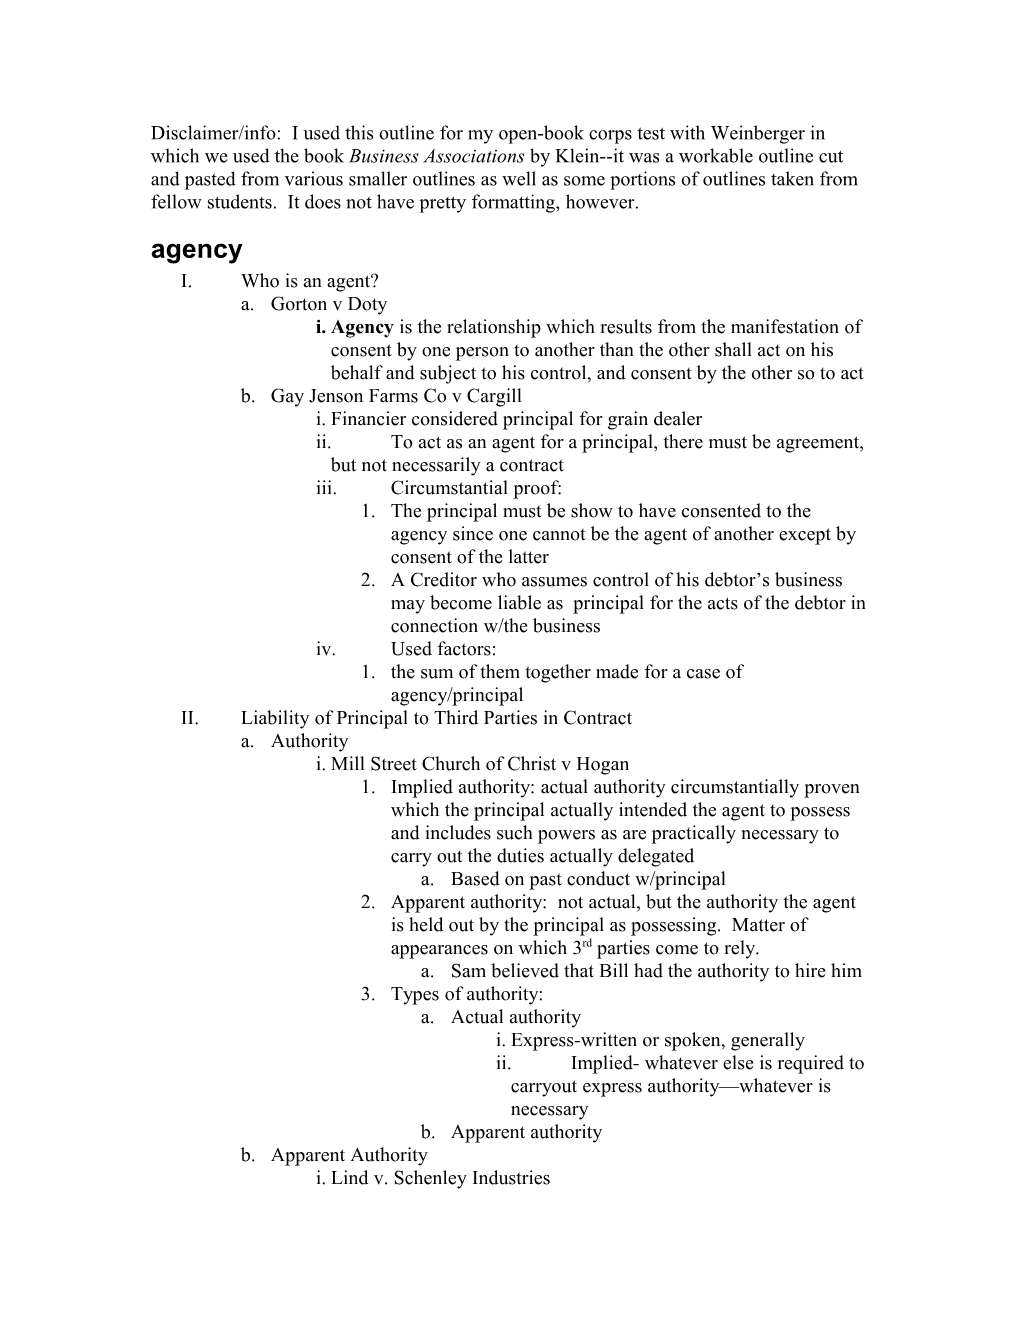 Disclaimer/Info: I Used This Outline for My Open-Book Corps Test with Weinberger in Which